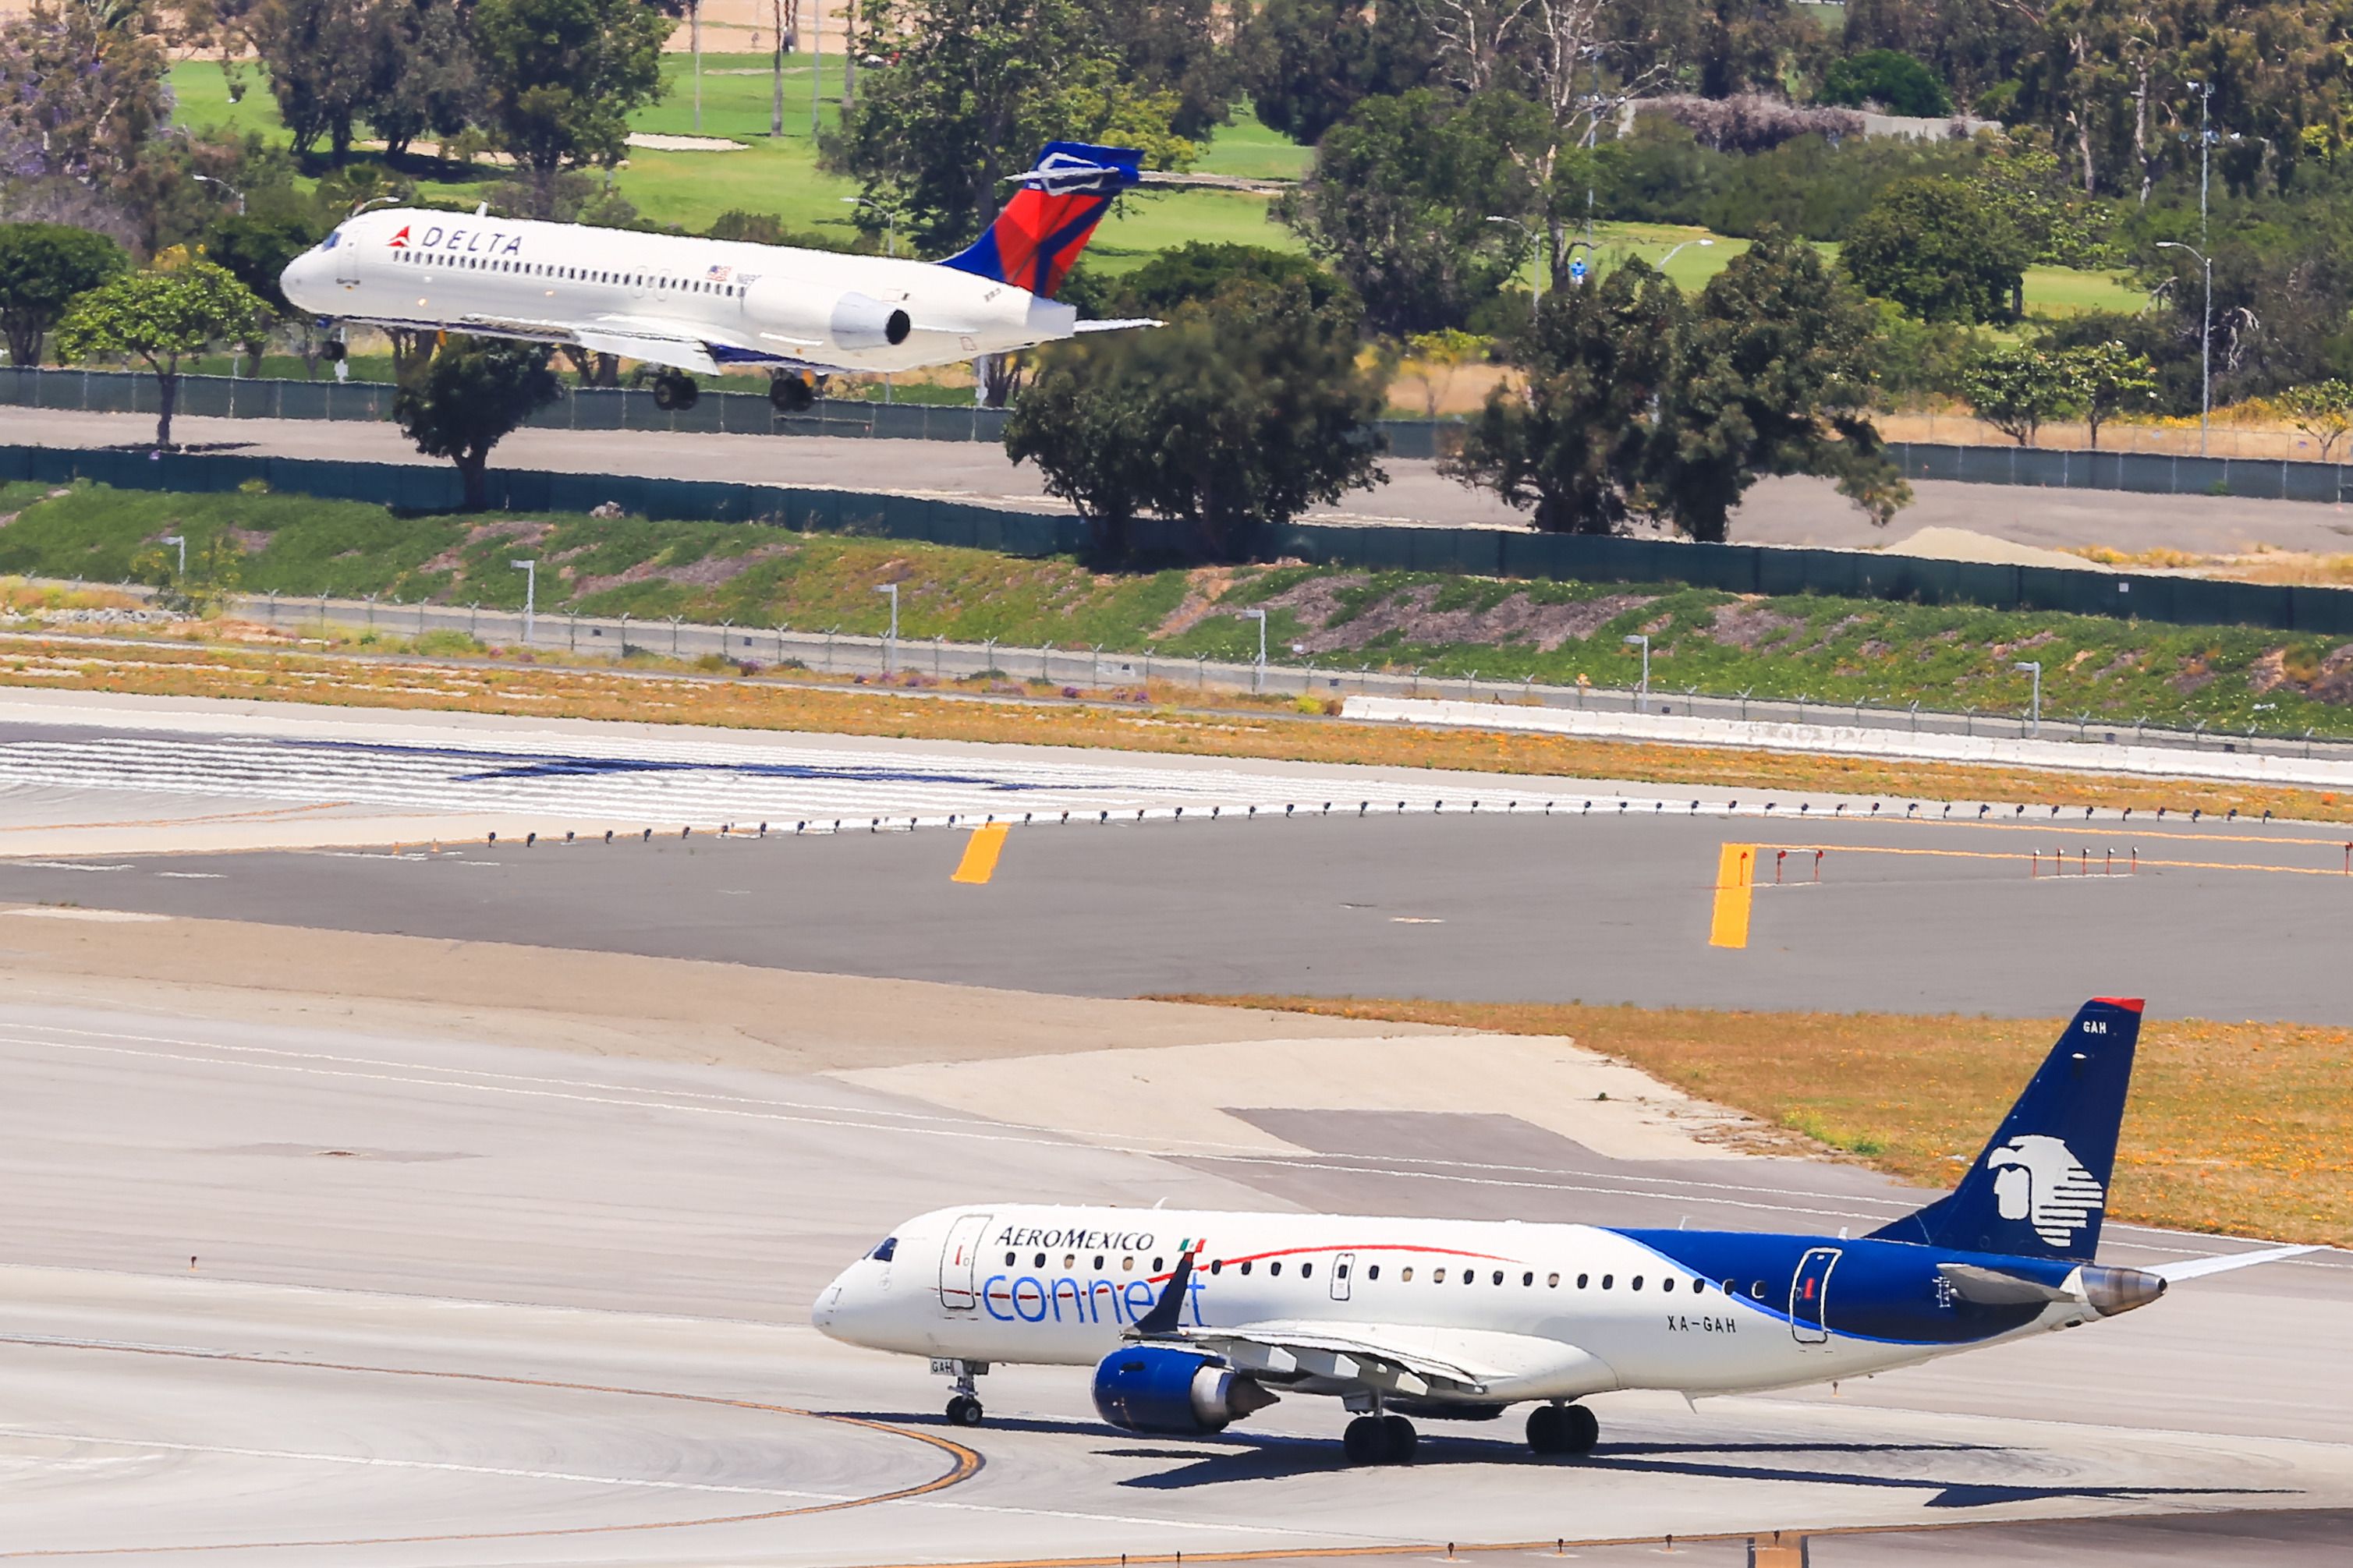 An Aeromexico-Plane (ERJ-190) is waiting for take off at the Los Angeles International Airport (LAX). In the background a Delta plane lands.